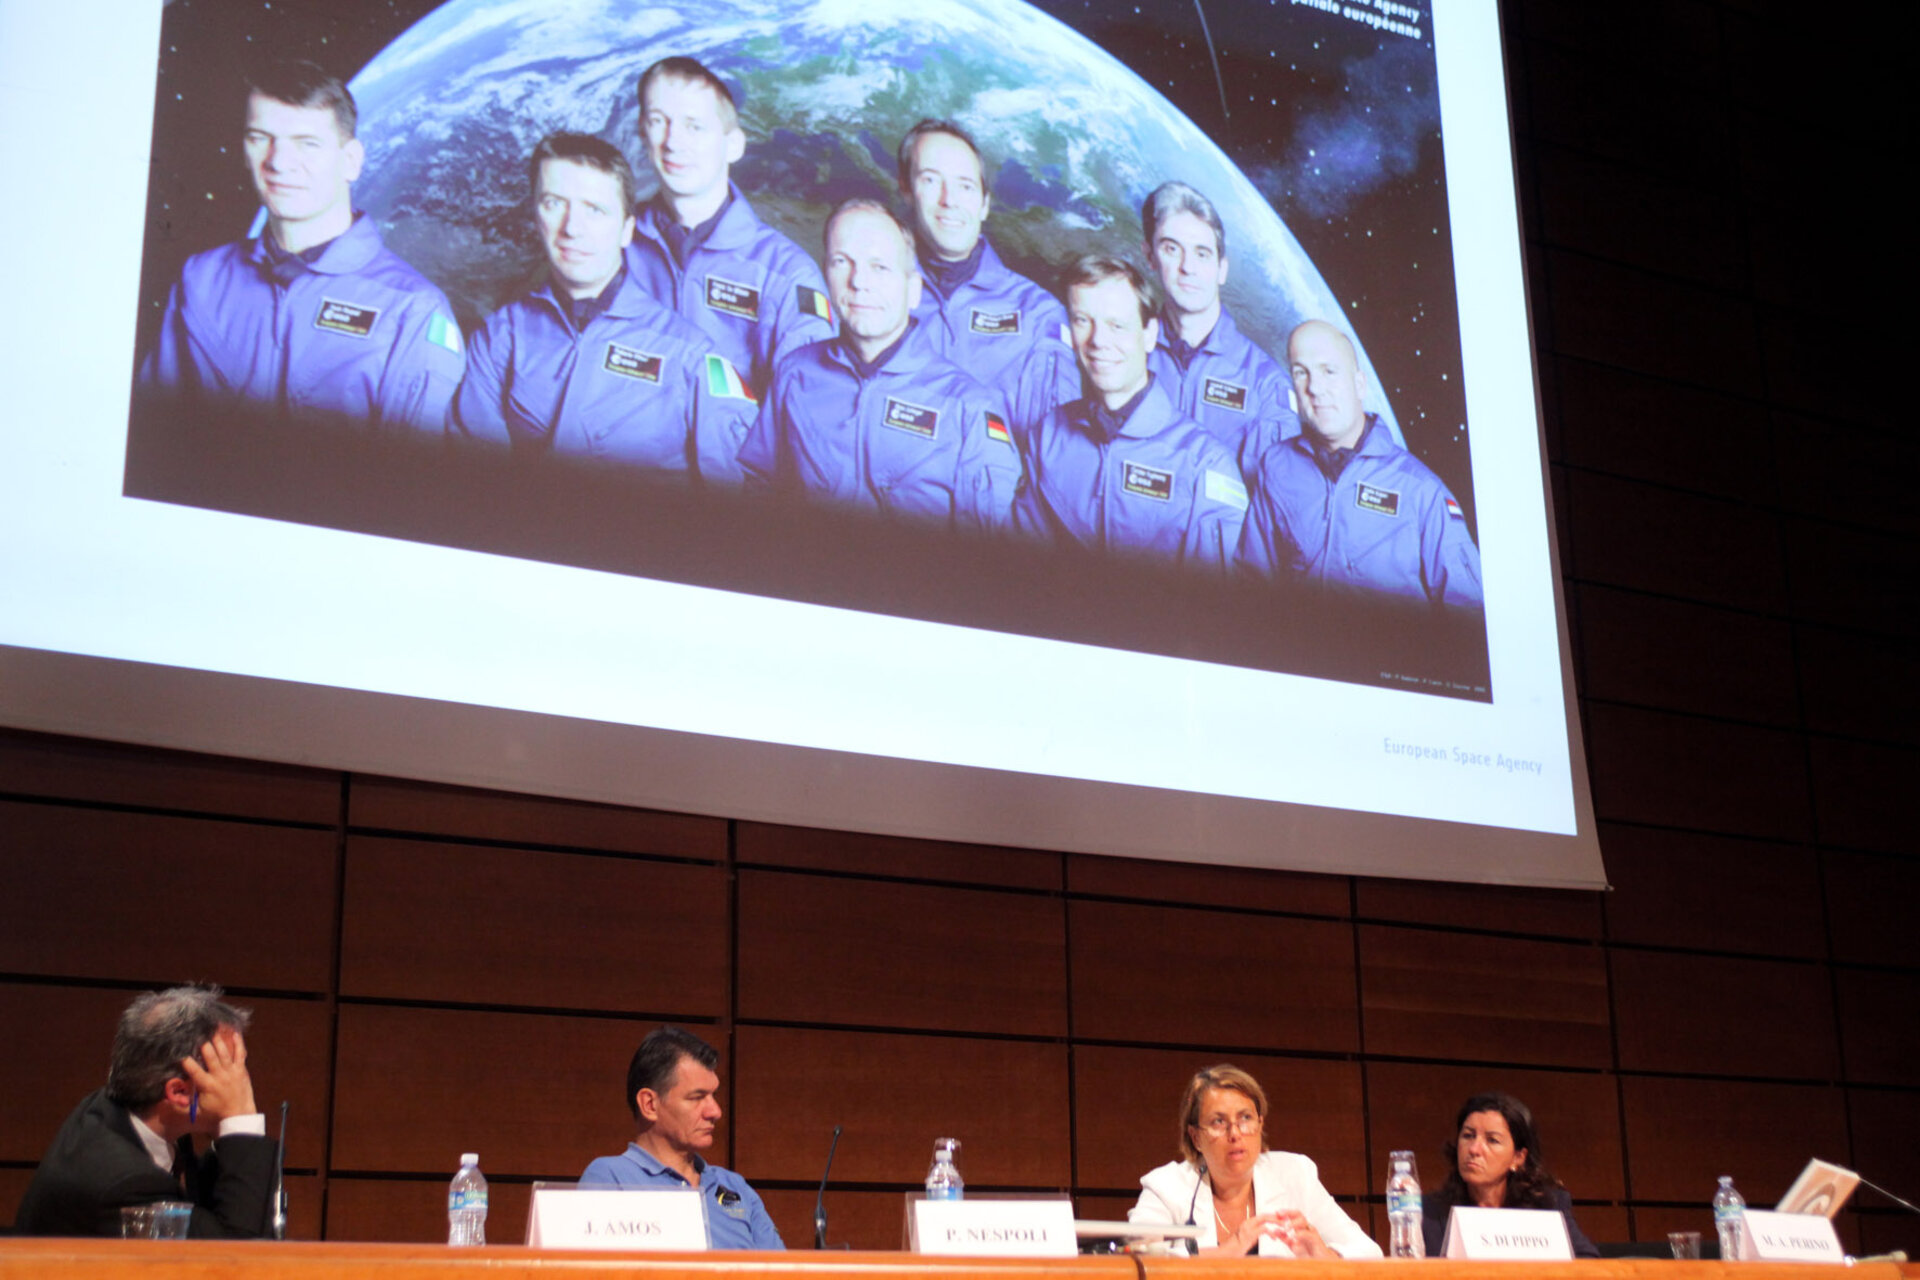 “Ten years of human presence on the International Space Station (ISS)” roundtable at ESOF 2010